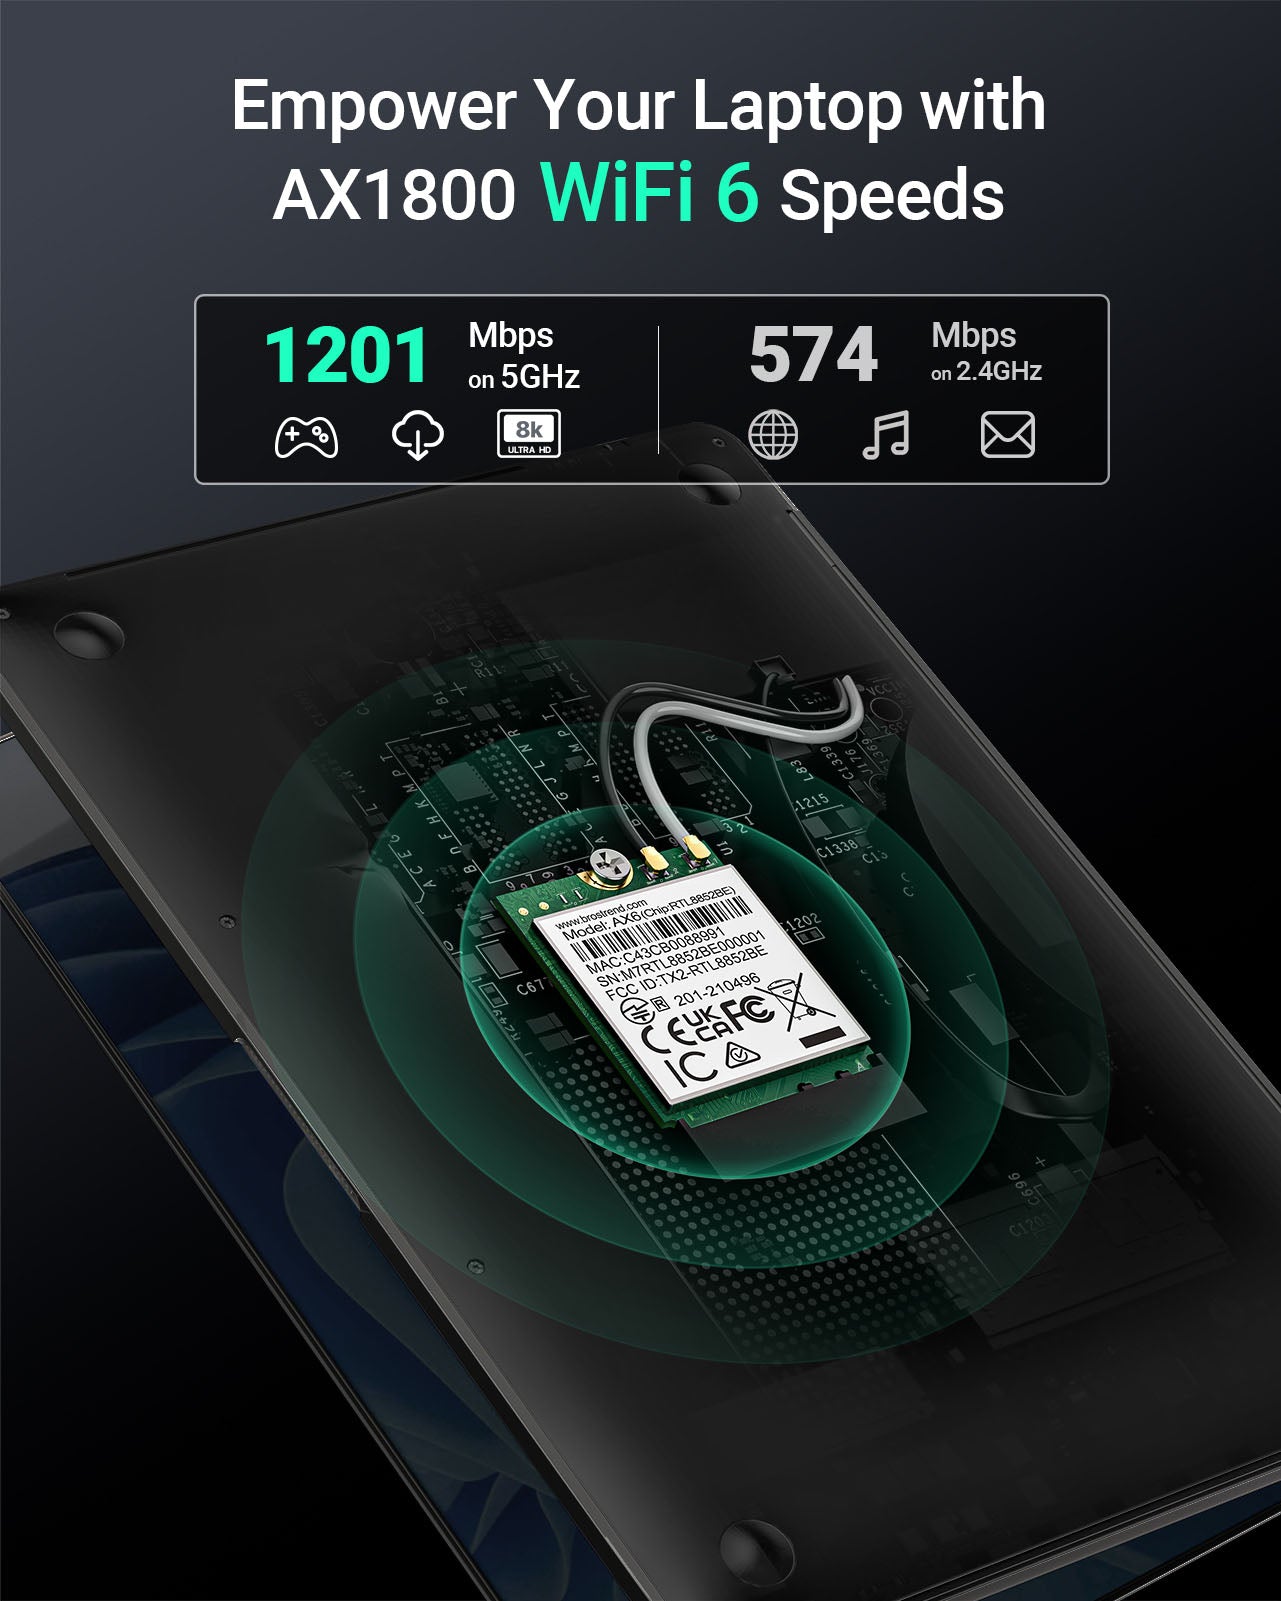 M.2 WiFi Card Works on a Laptop PC Delivers Fast Wireless Speeds of 1201Mbps on 5GHz or 574Mbps on 2.4GHz Band